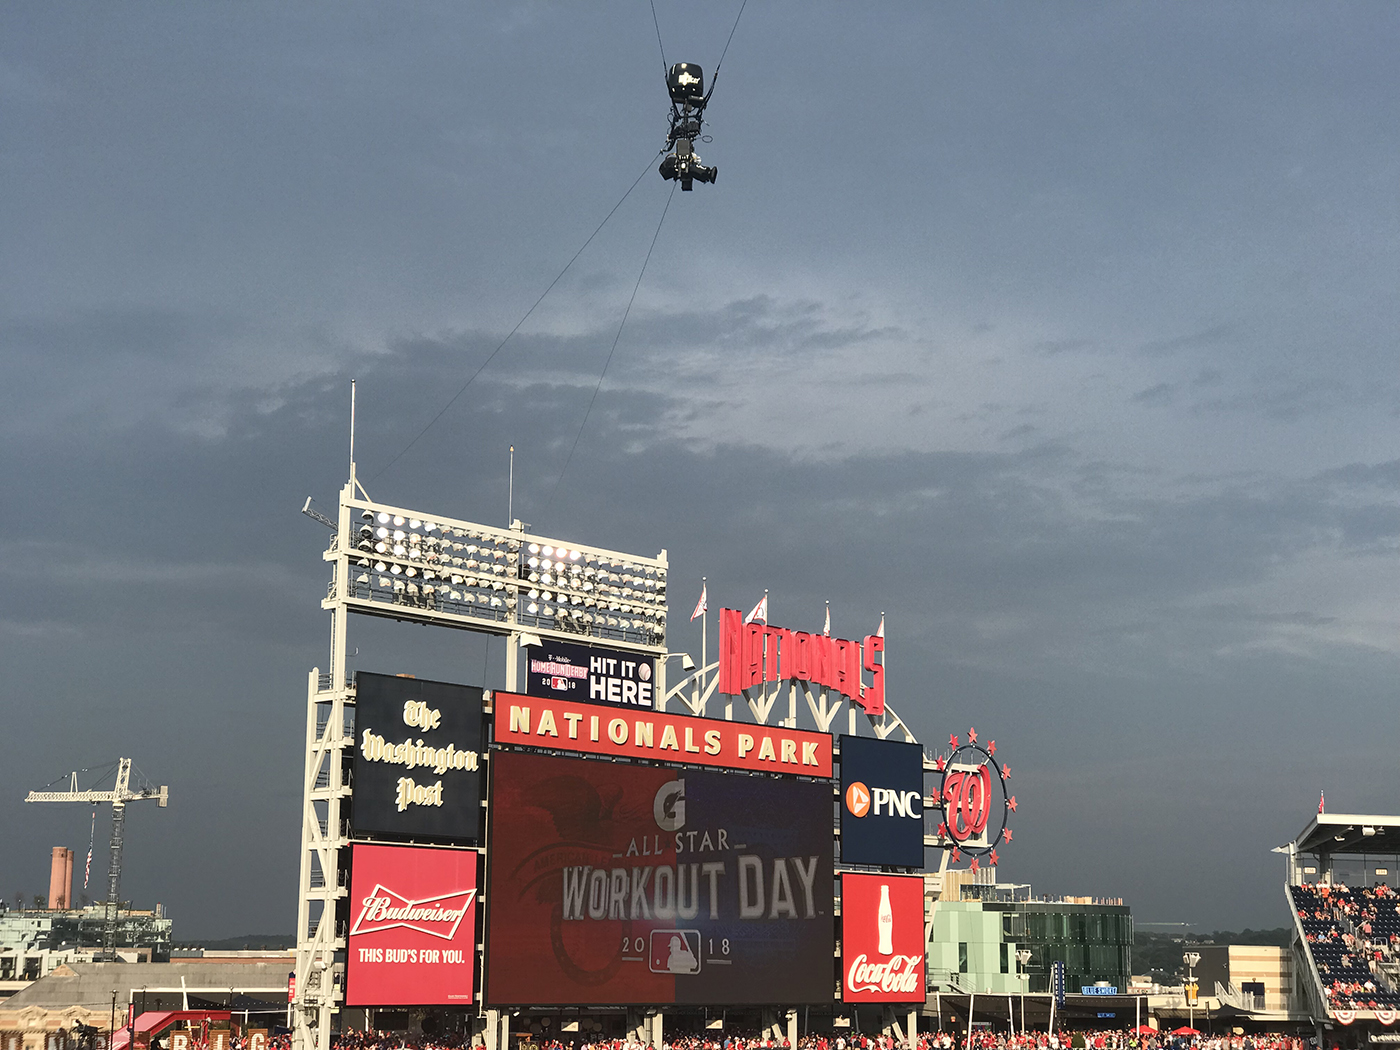 Live From Mlb All Star Fox Sports Takes Flight With Skycam Most High Speed Cameras Ever